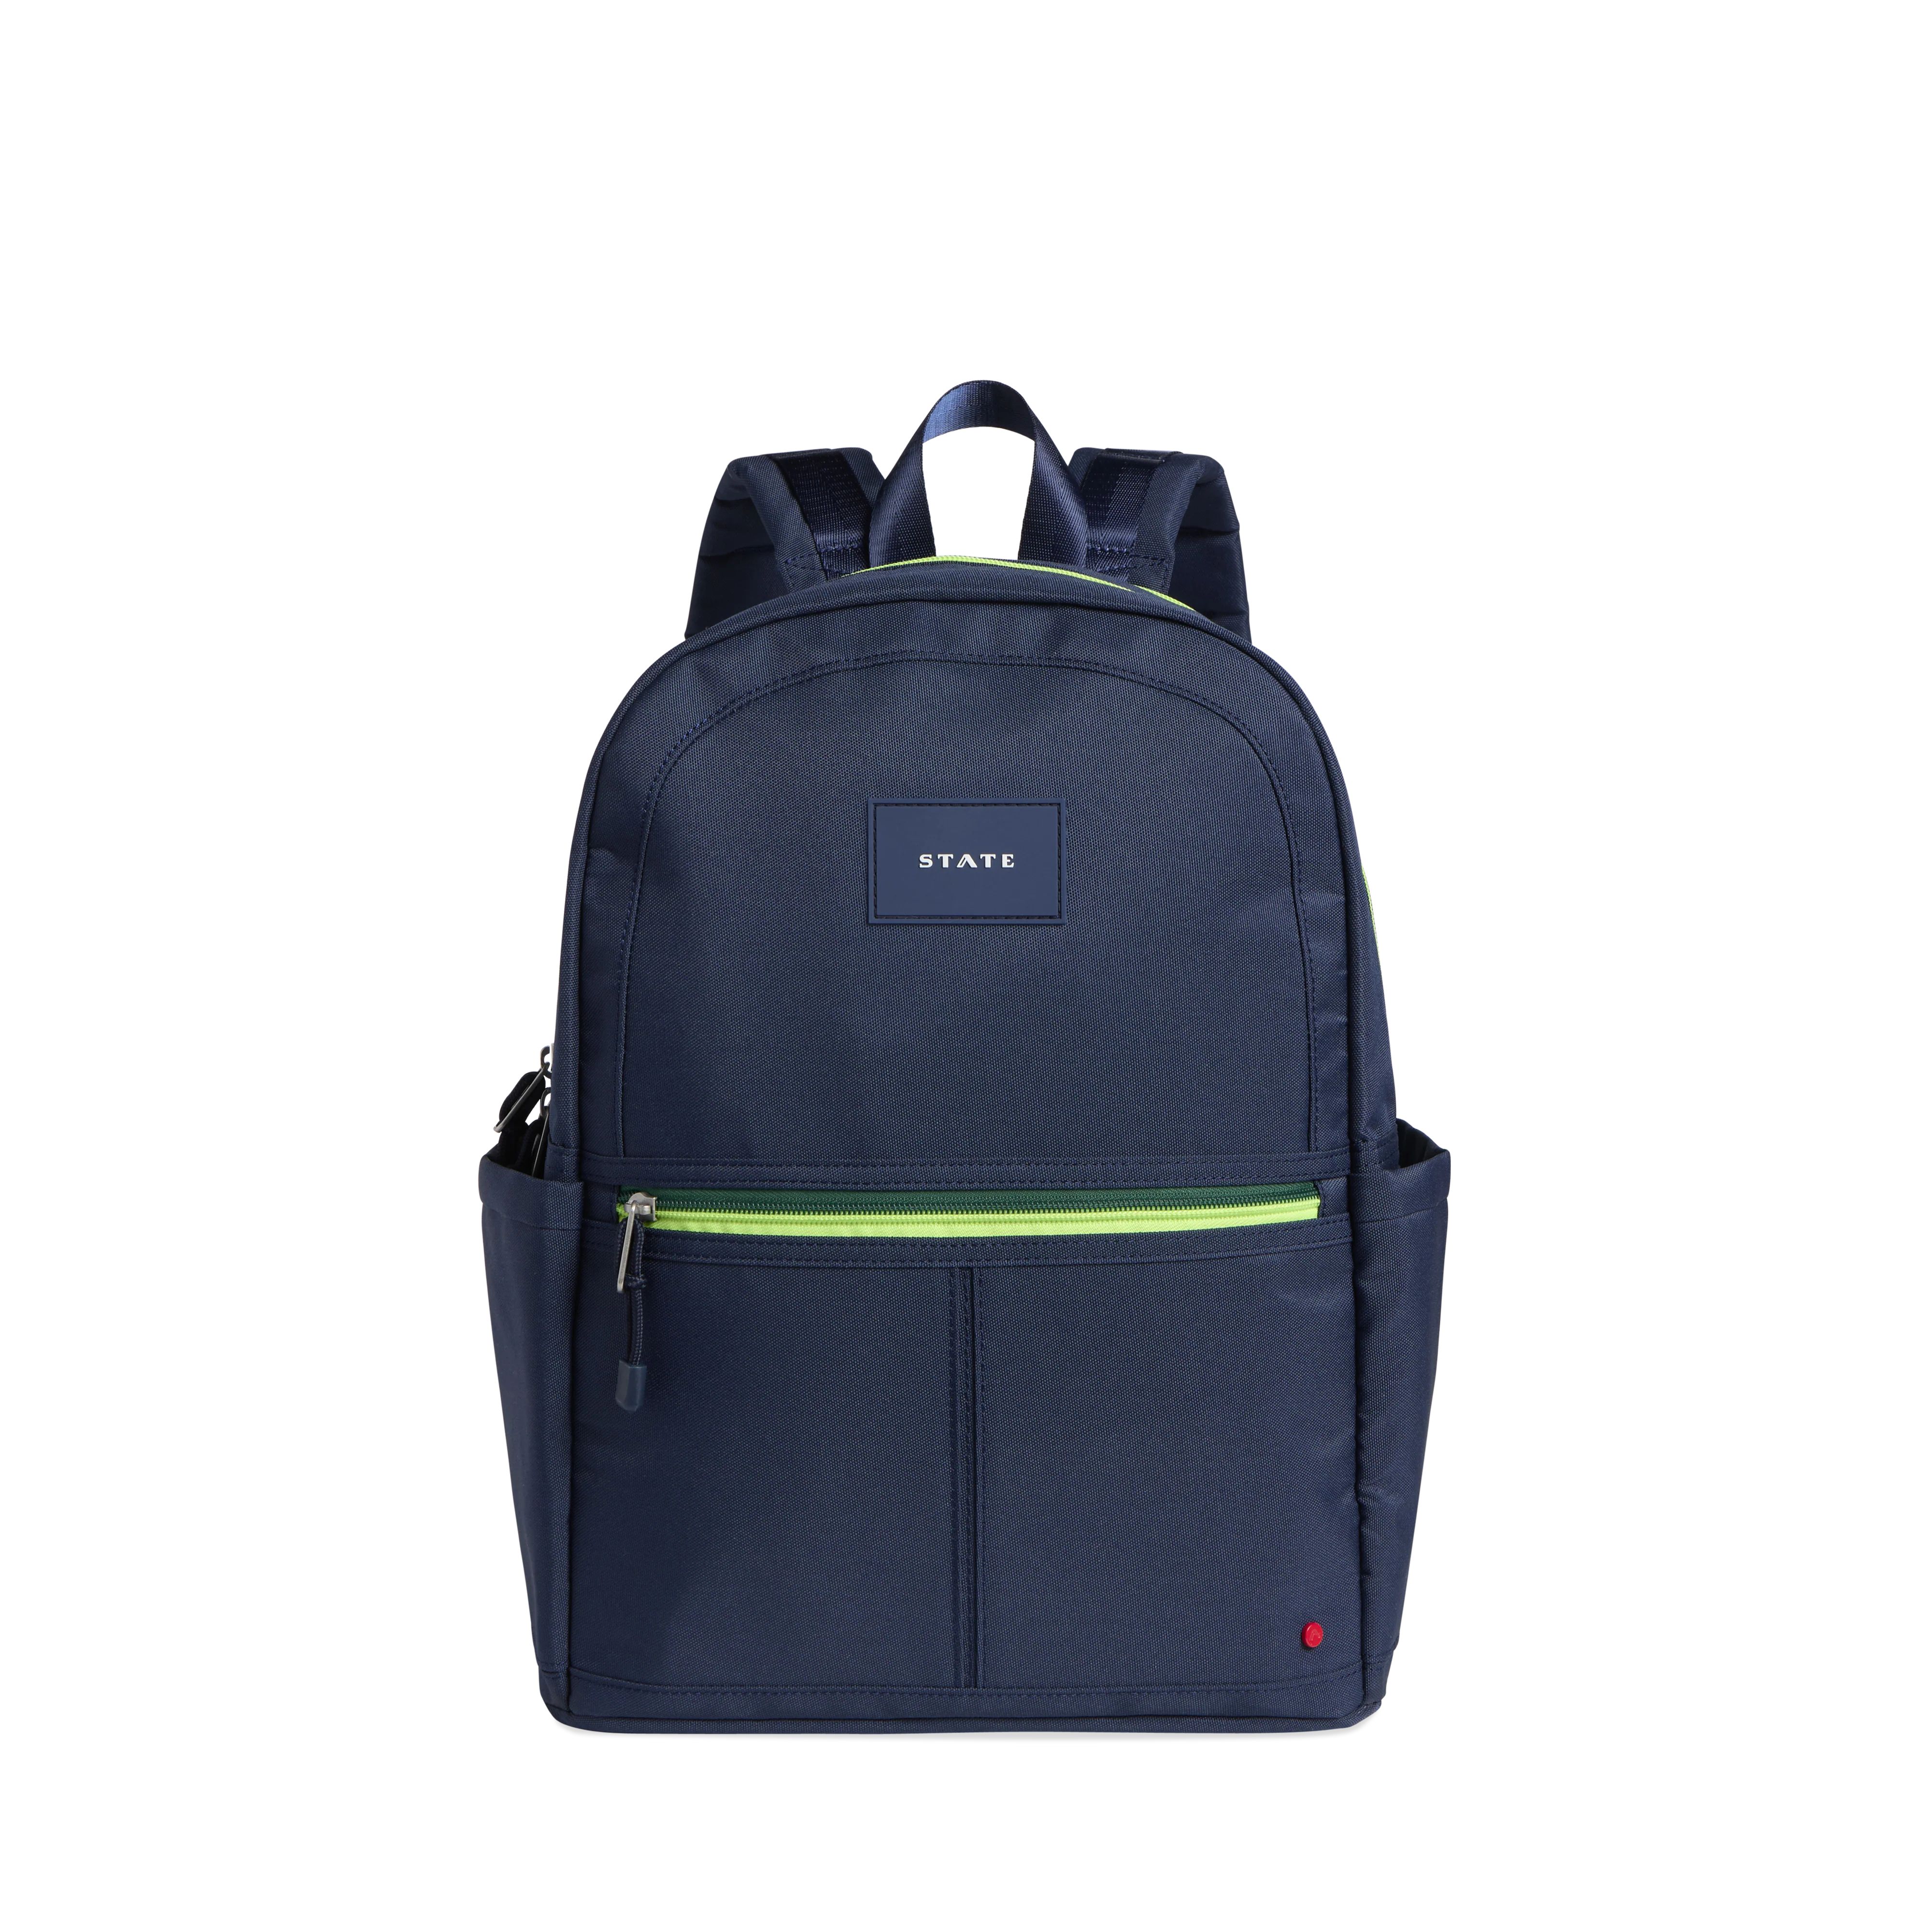 STATE Bags | Kane Kids Double Pocket Backpack Polyester Canvas Navy | STATE Bags